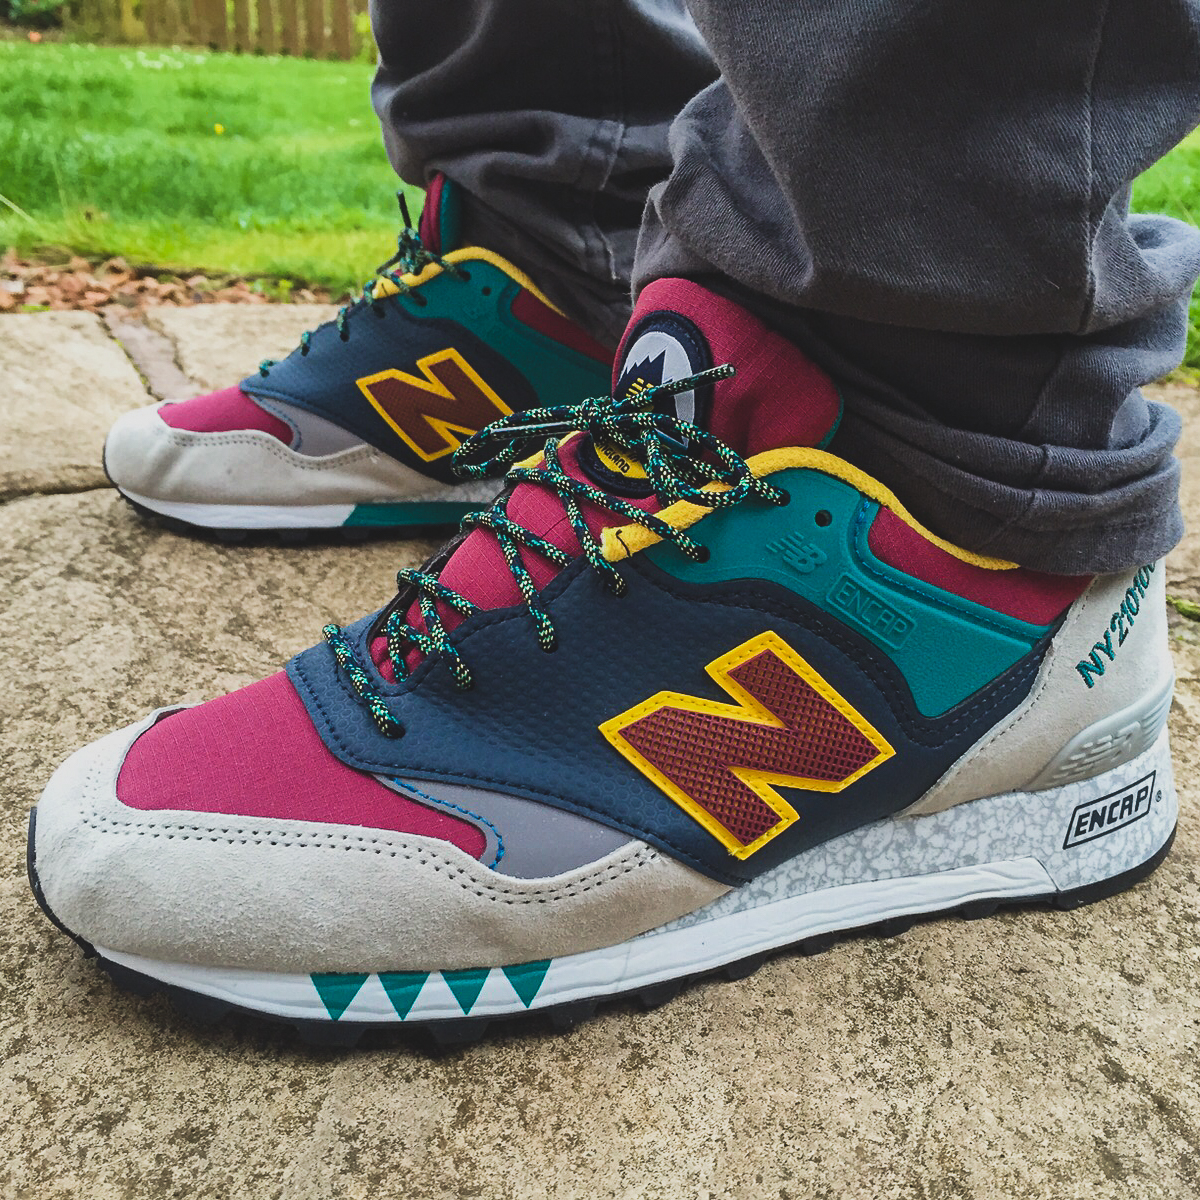 new balance made in uk 577 napes pack